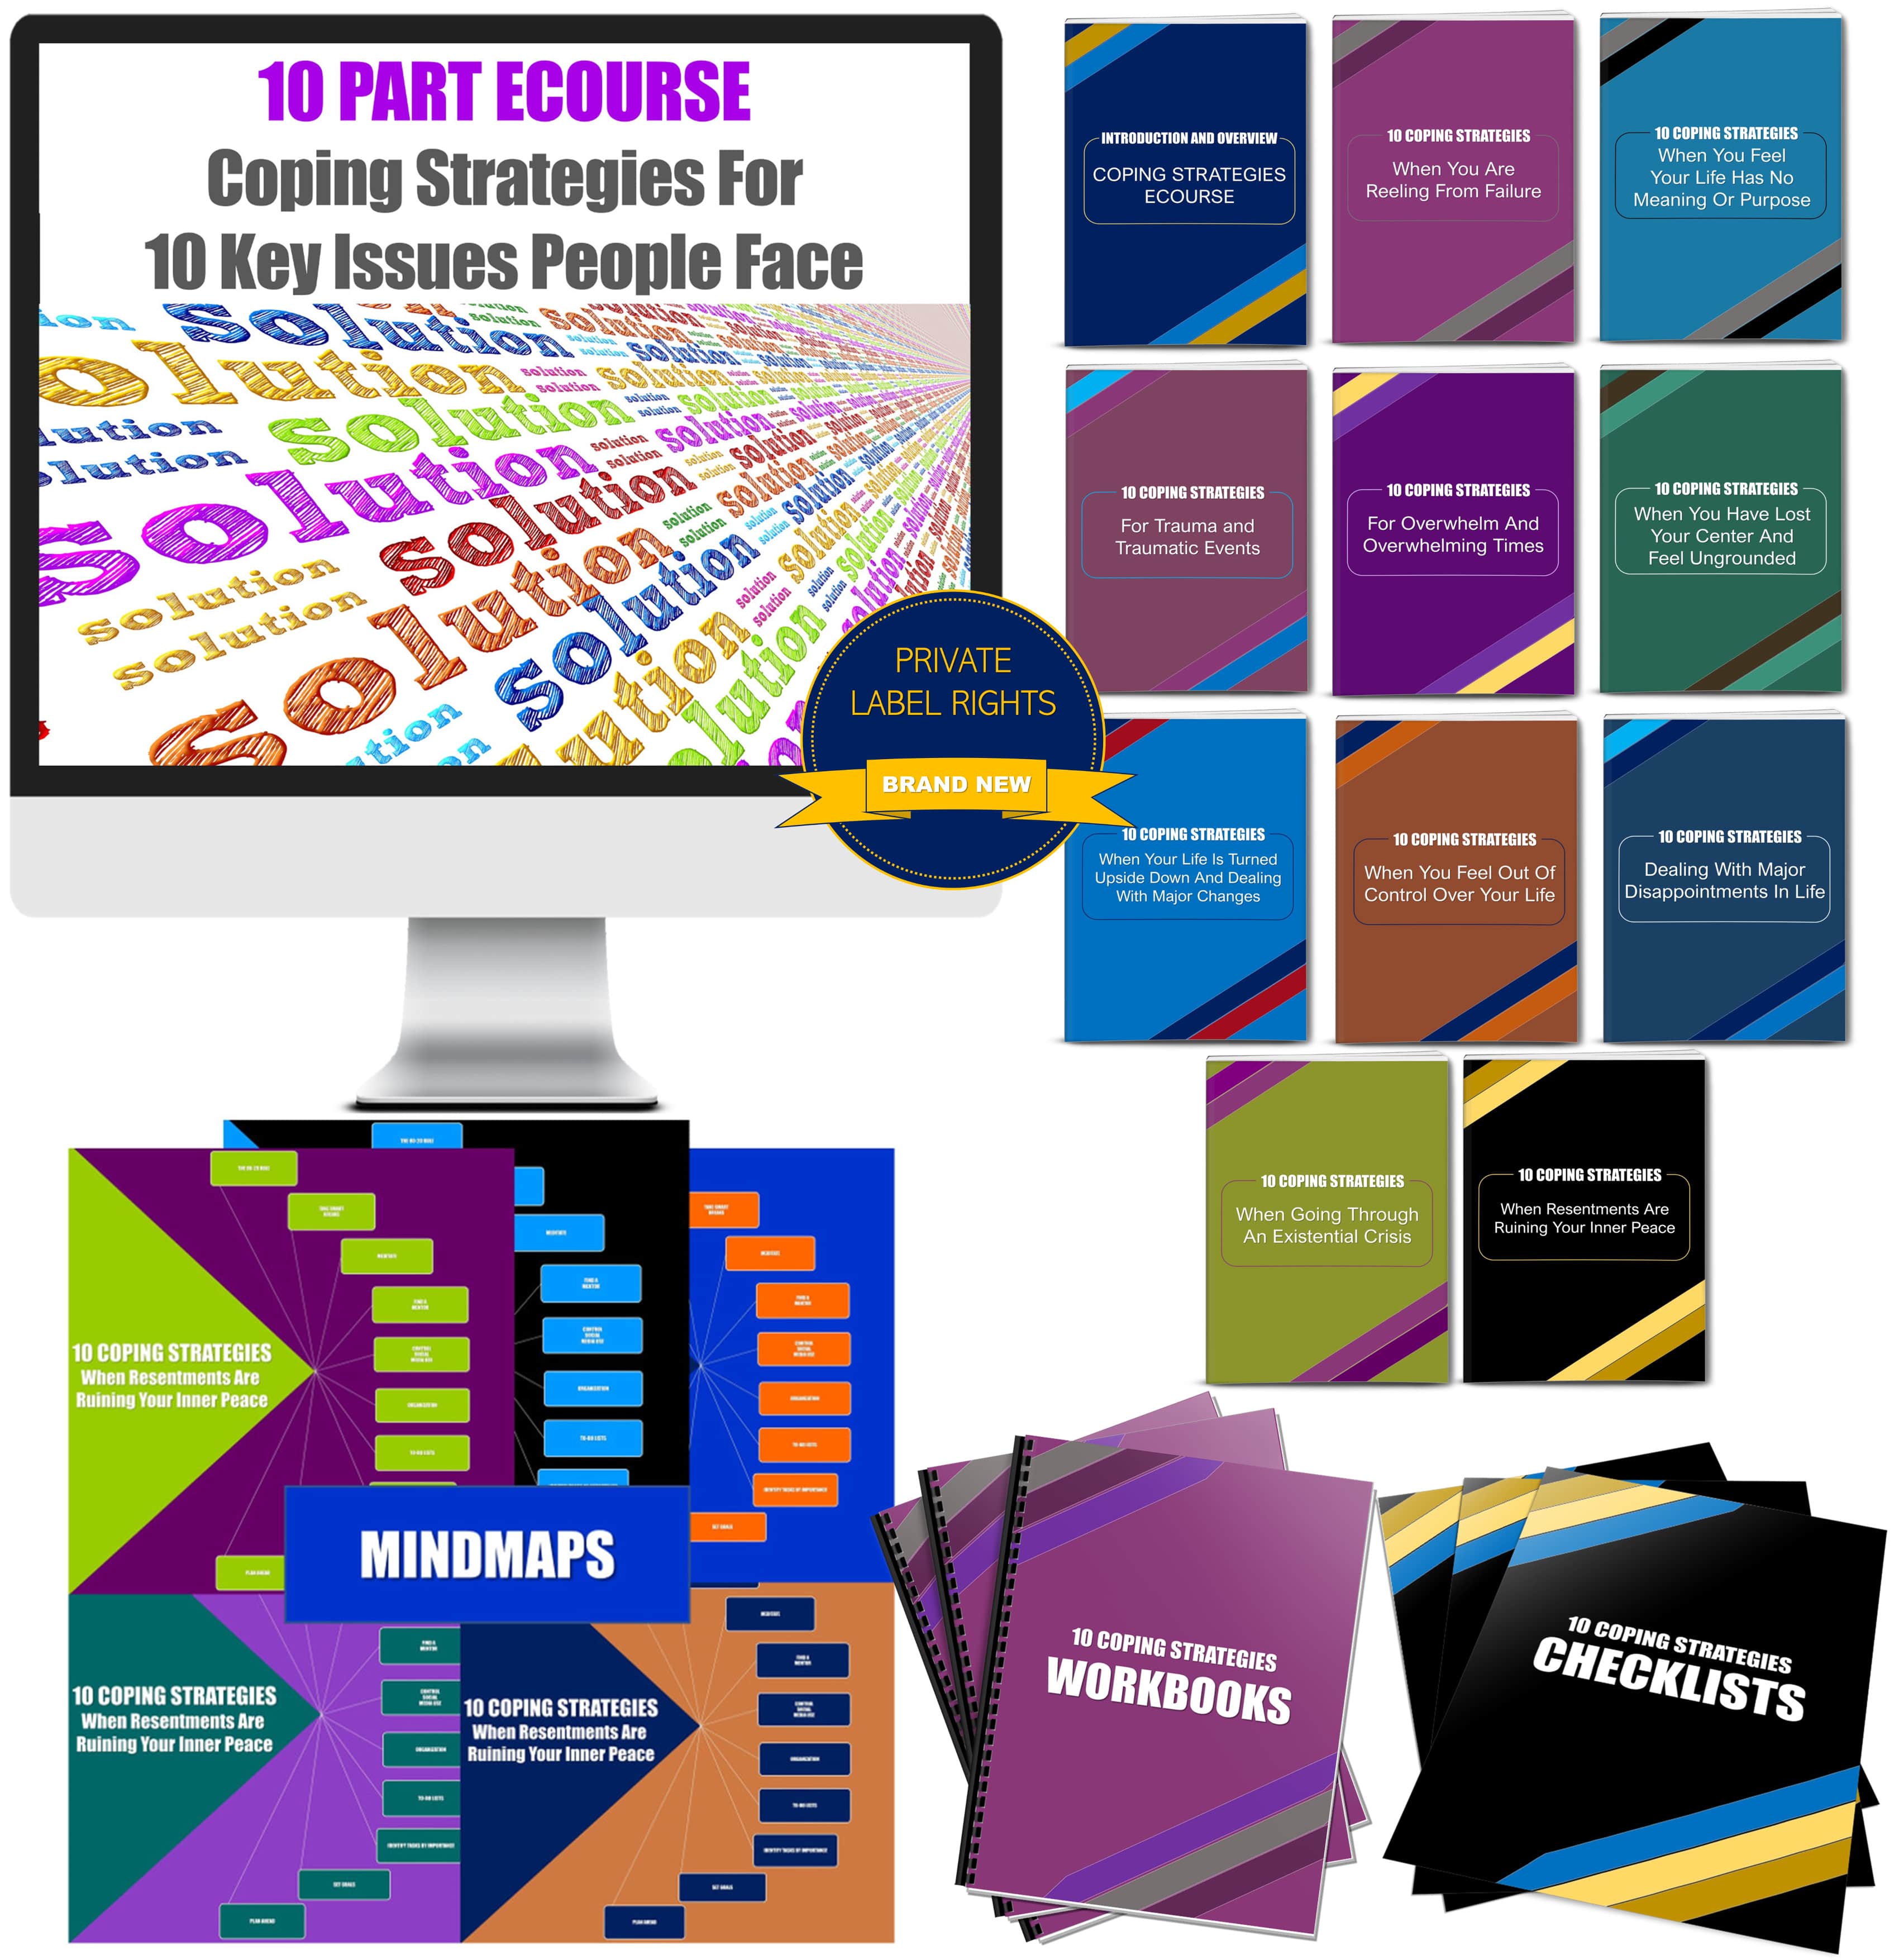 10 Part eCourse: Coping Strategies For 10 Key Issues People Face - PLR Rights